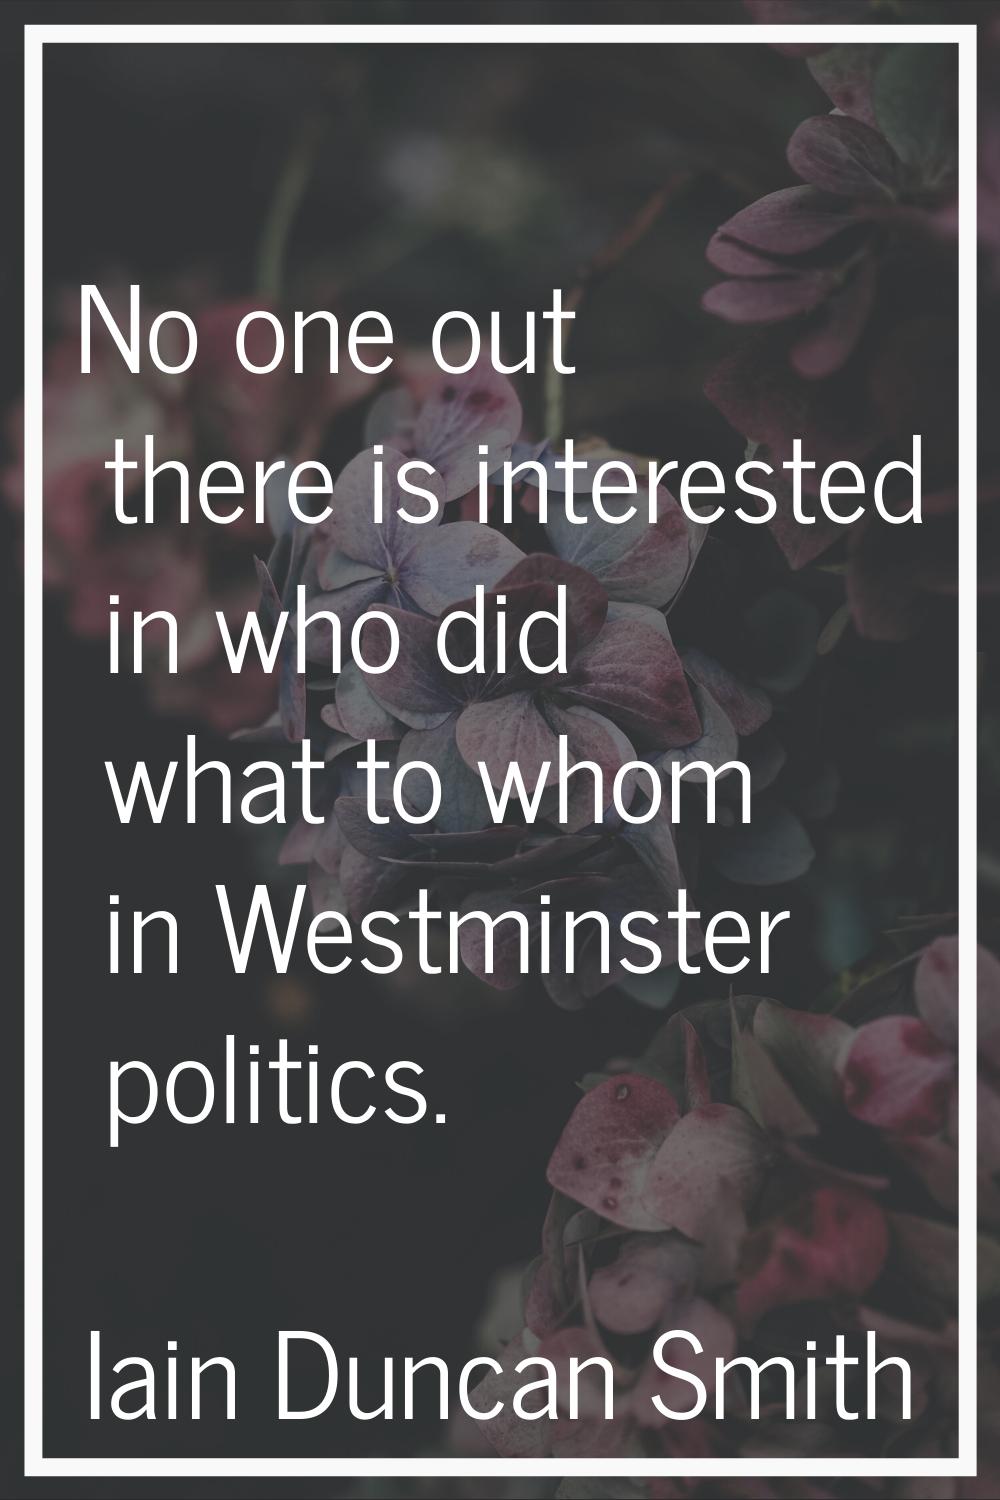 No one out there is interested in who did what to whom in Westminster politics.